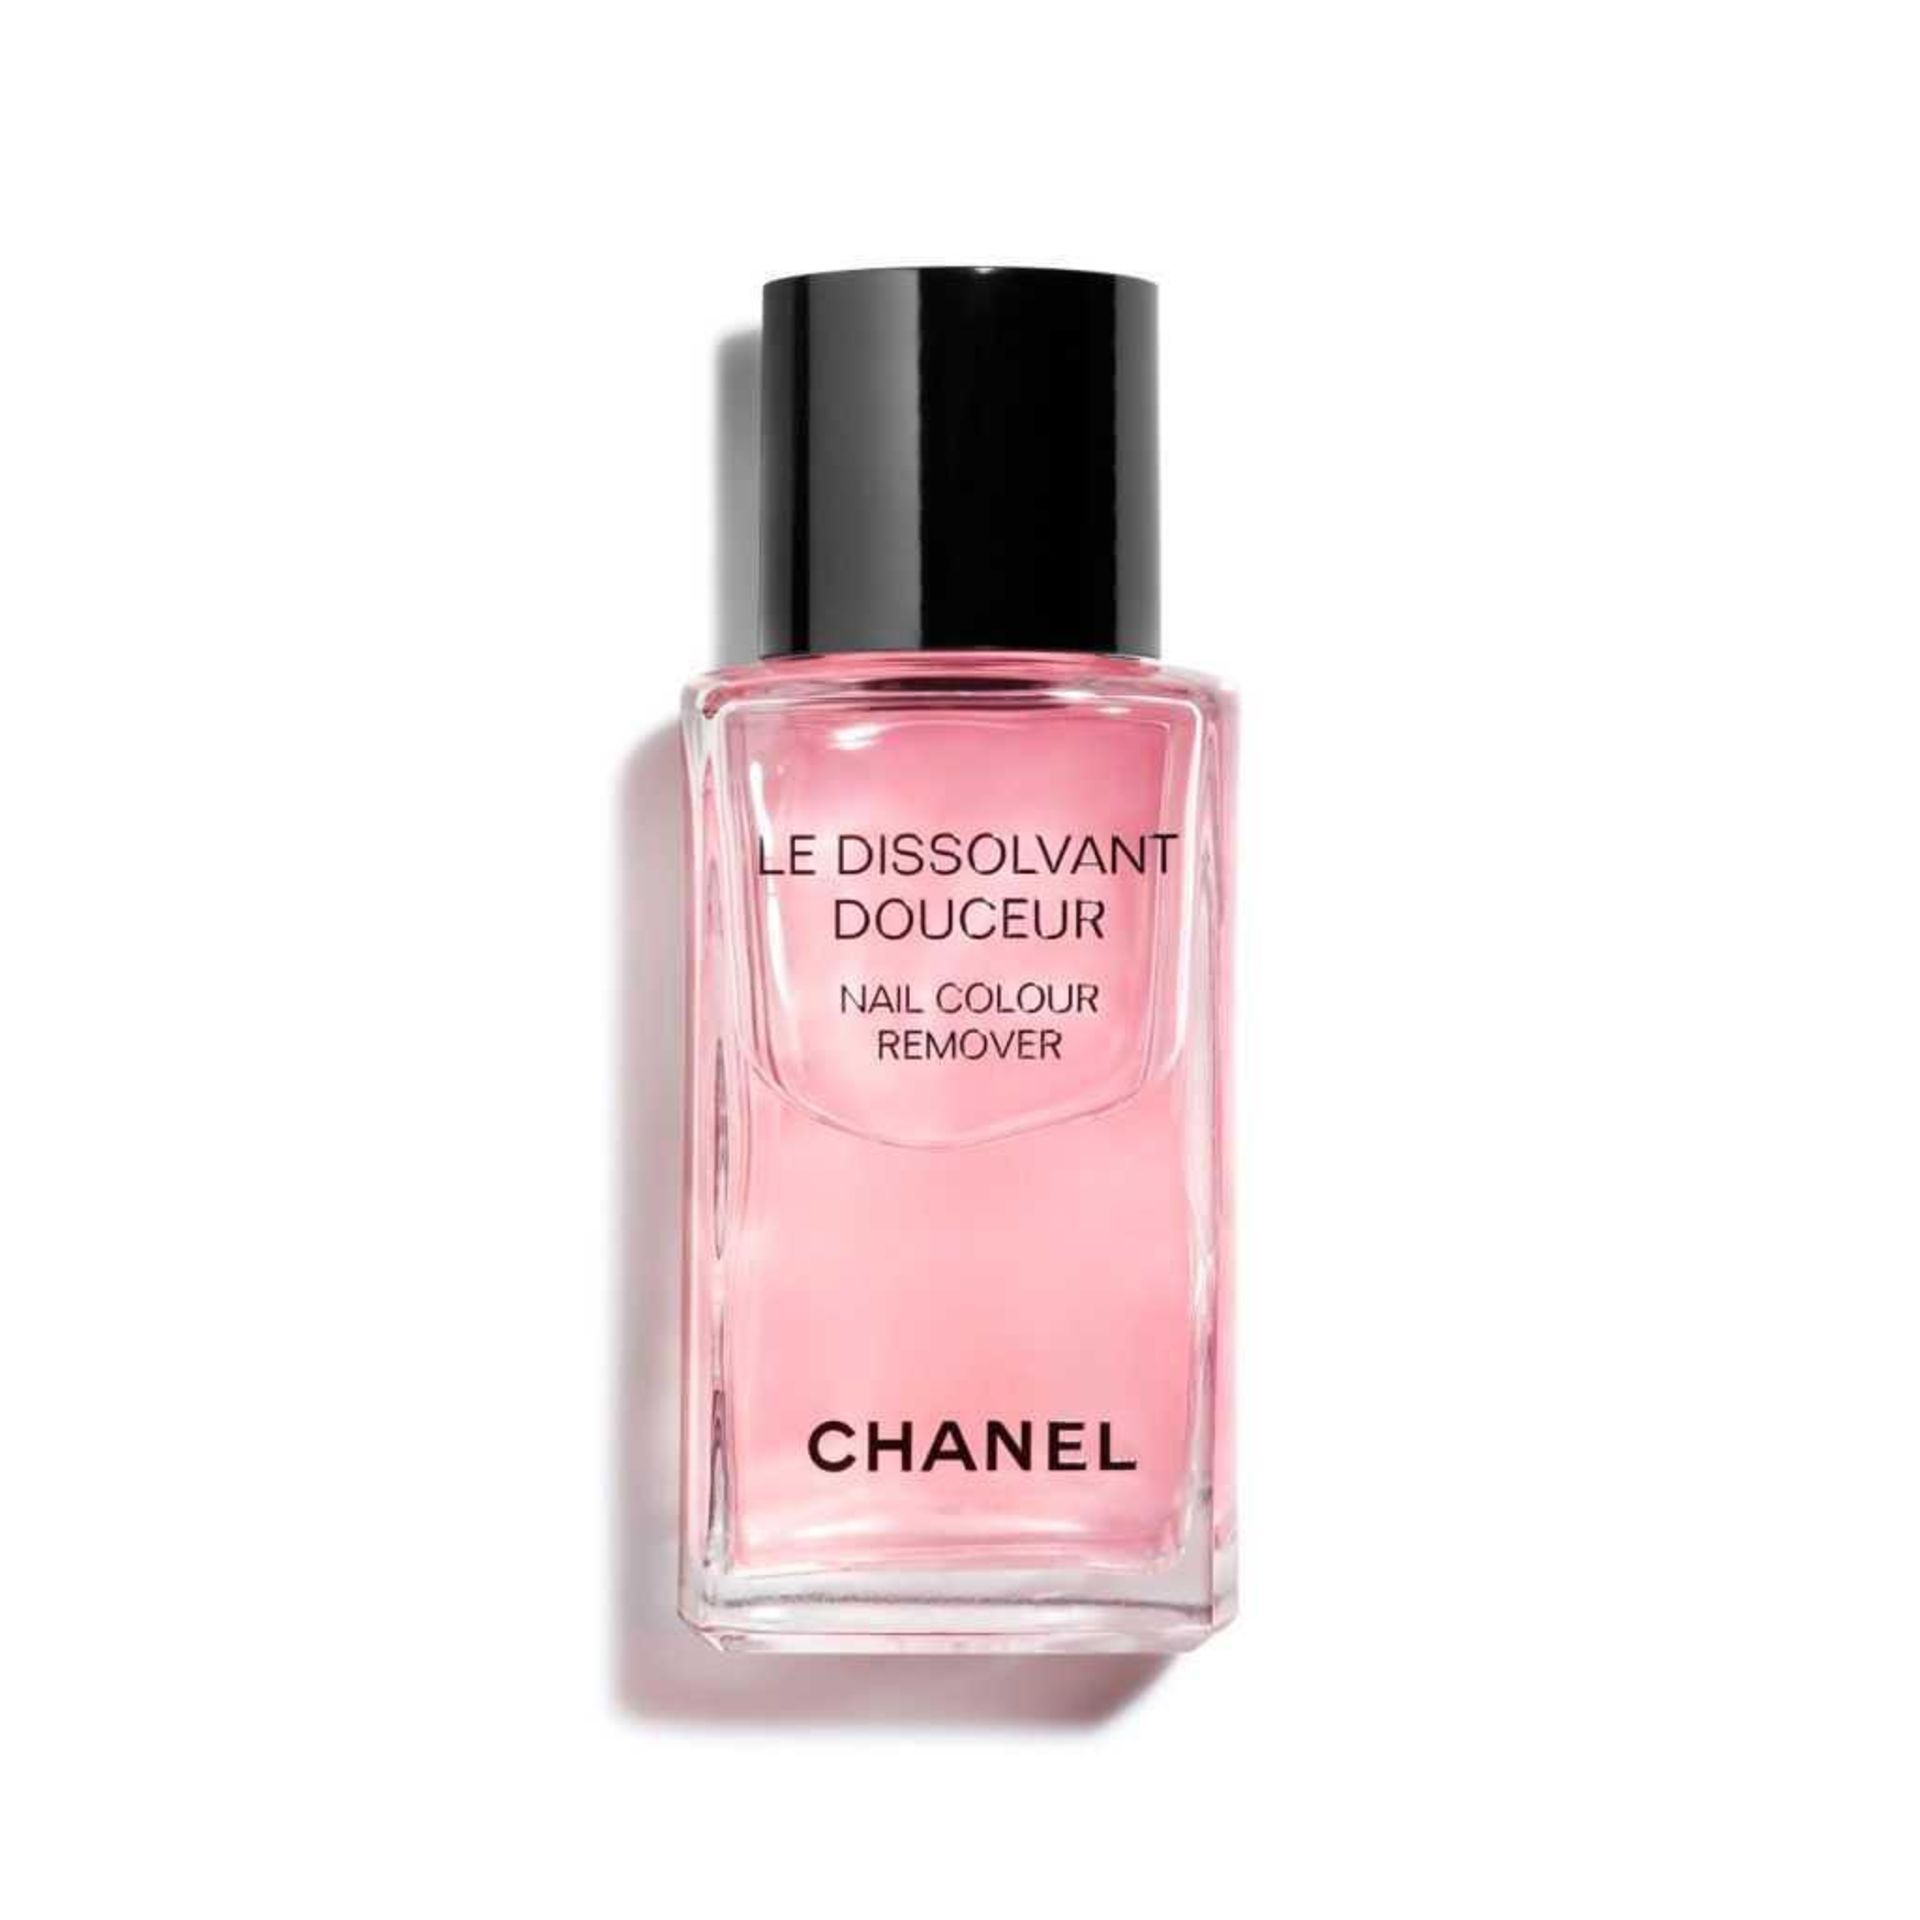 Rrp £20 Unboxed Bottle Of Chanel Nail Colour Remover 50Ml - Image 2 of 2